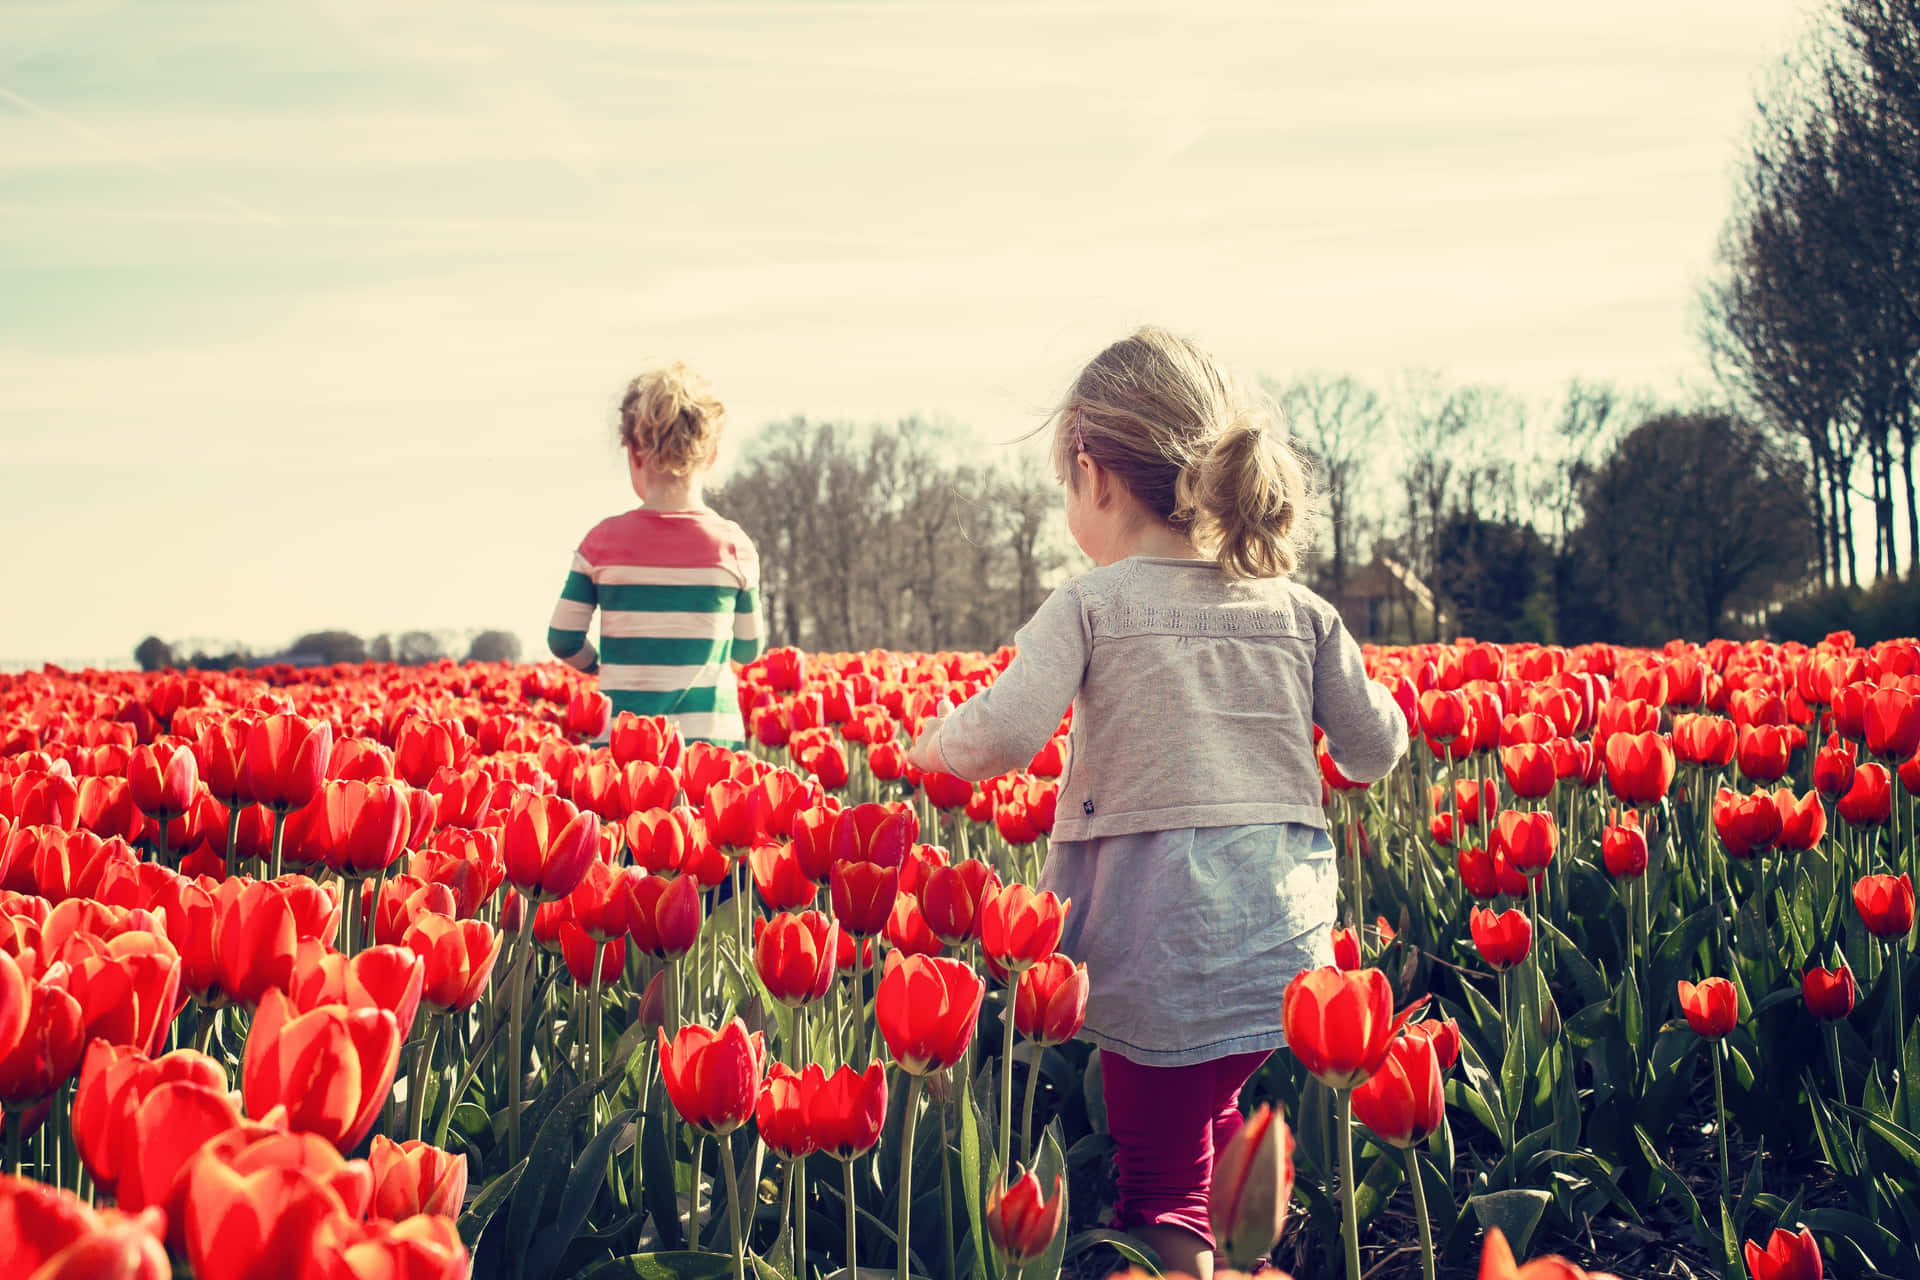 Two Children Walking Through A Field Of Red Tulips